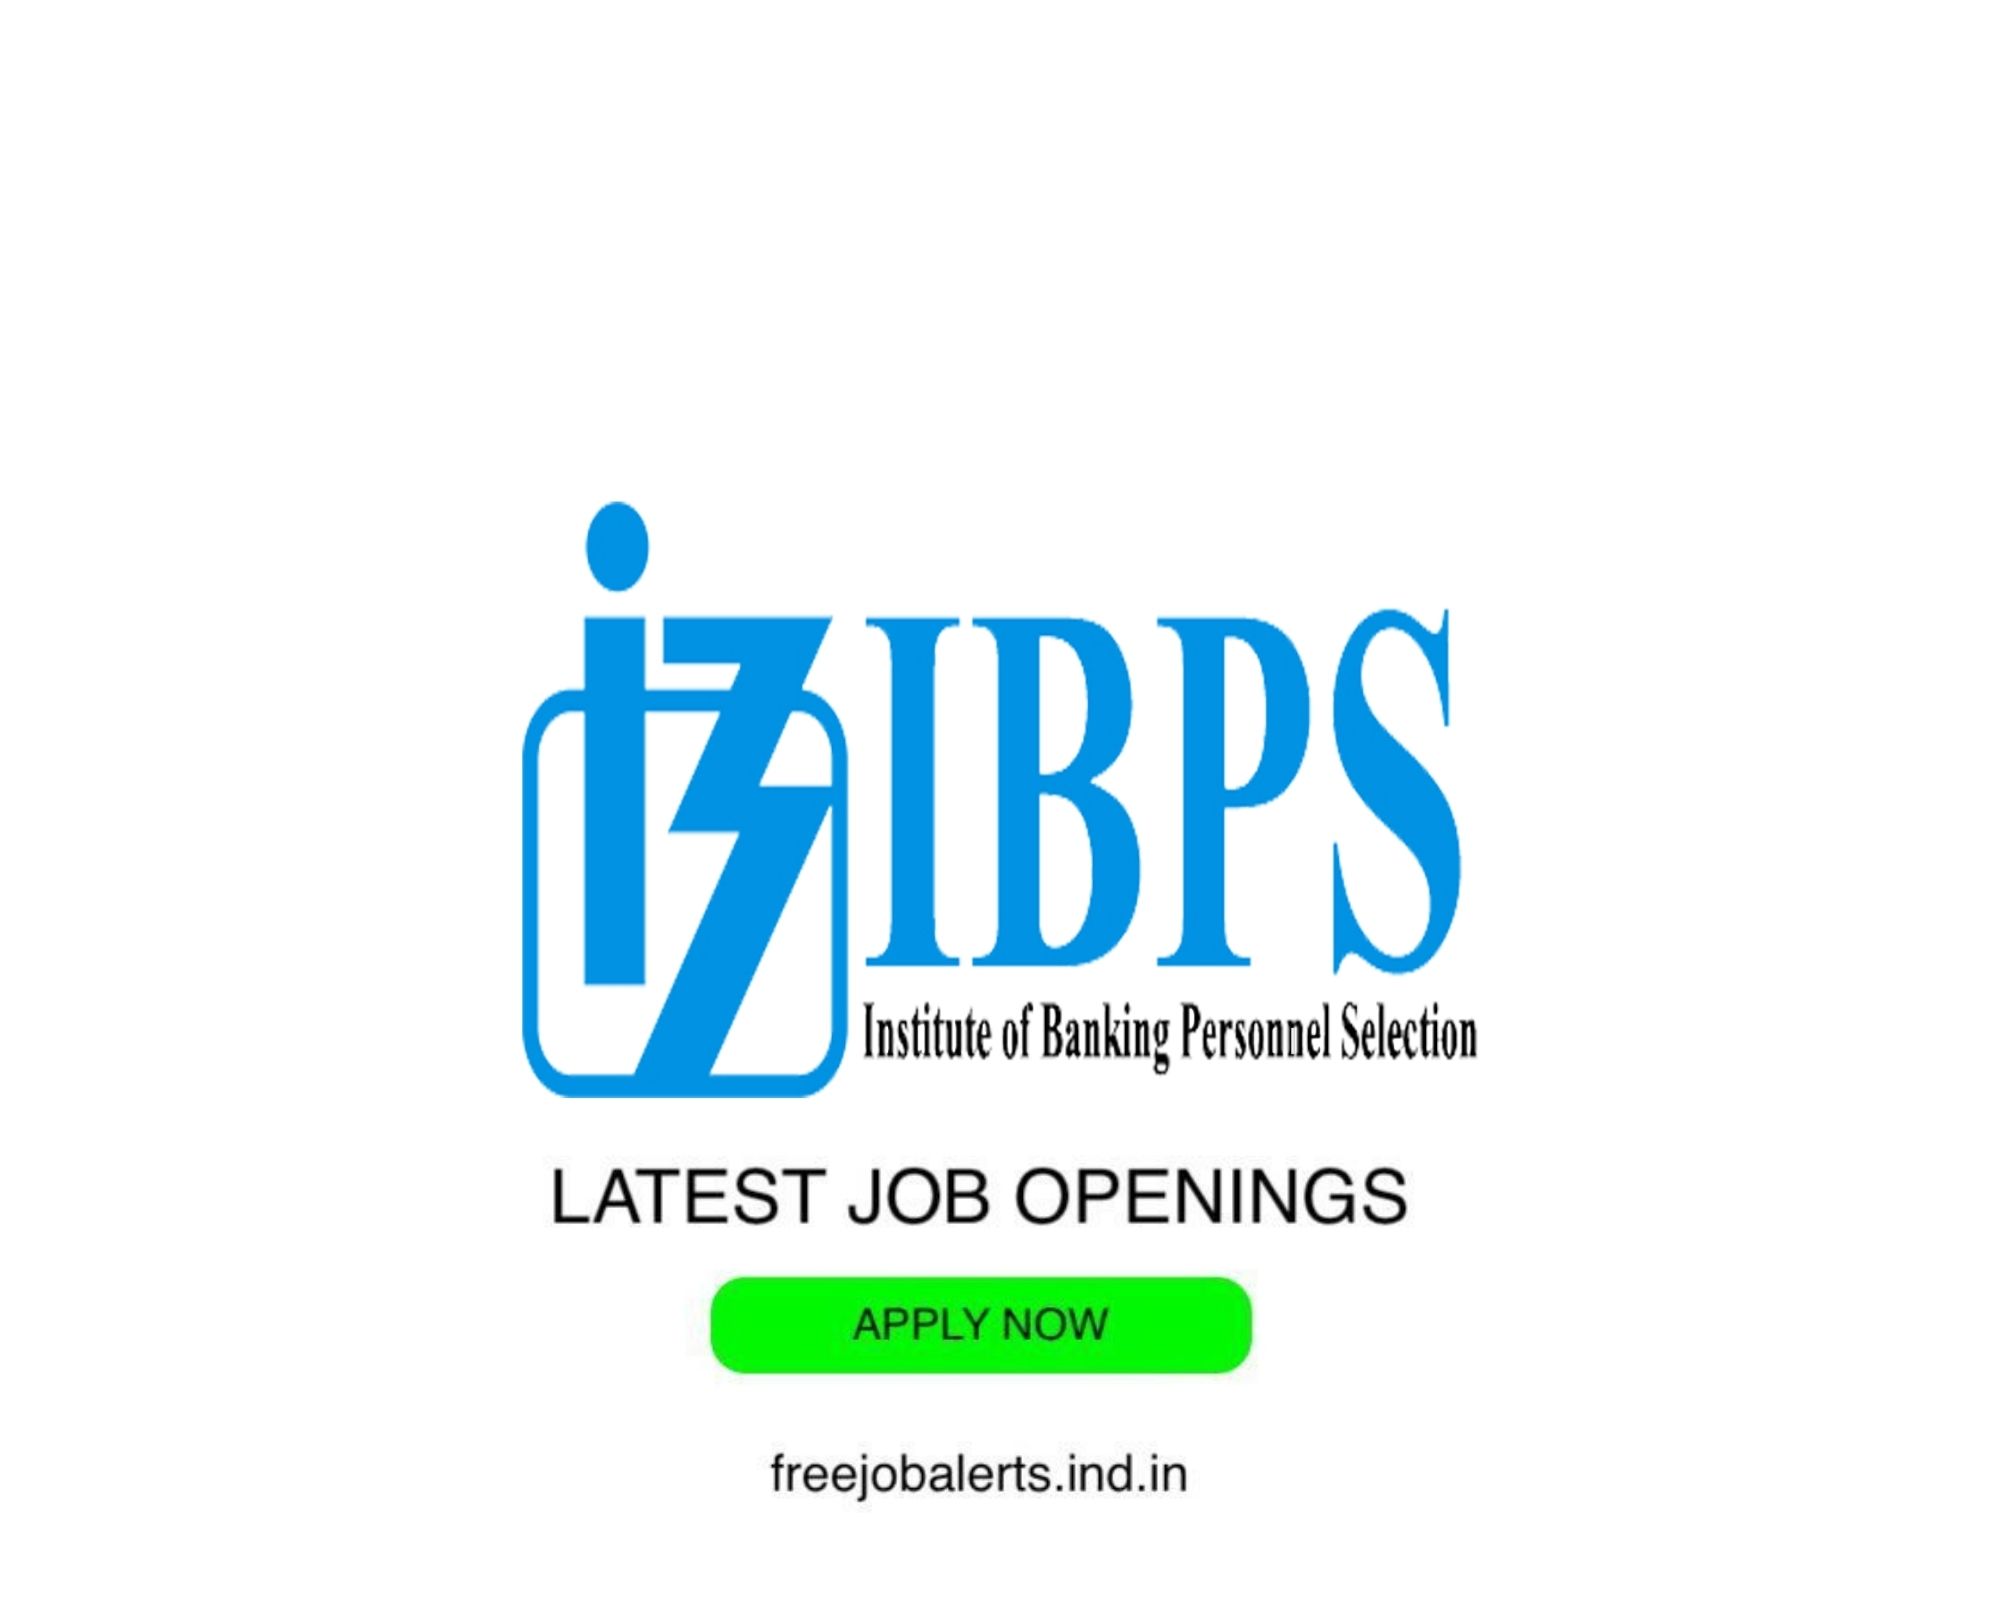 IBPS- Institute of Banking Personnel Selection- Latest Govt job openings - Free job alerts, Indian Govt Jobs